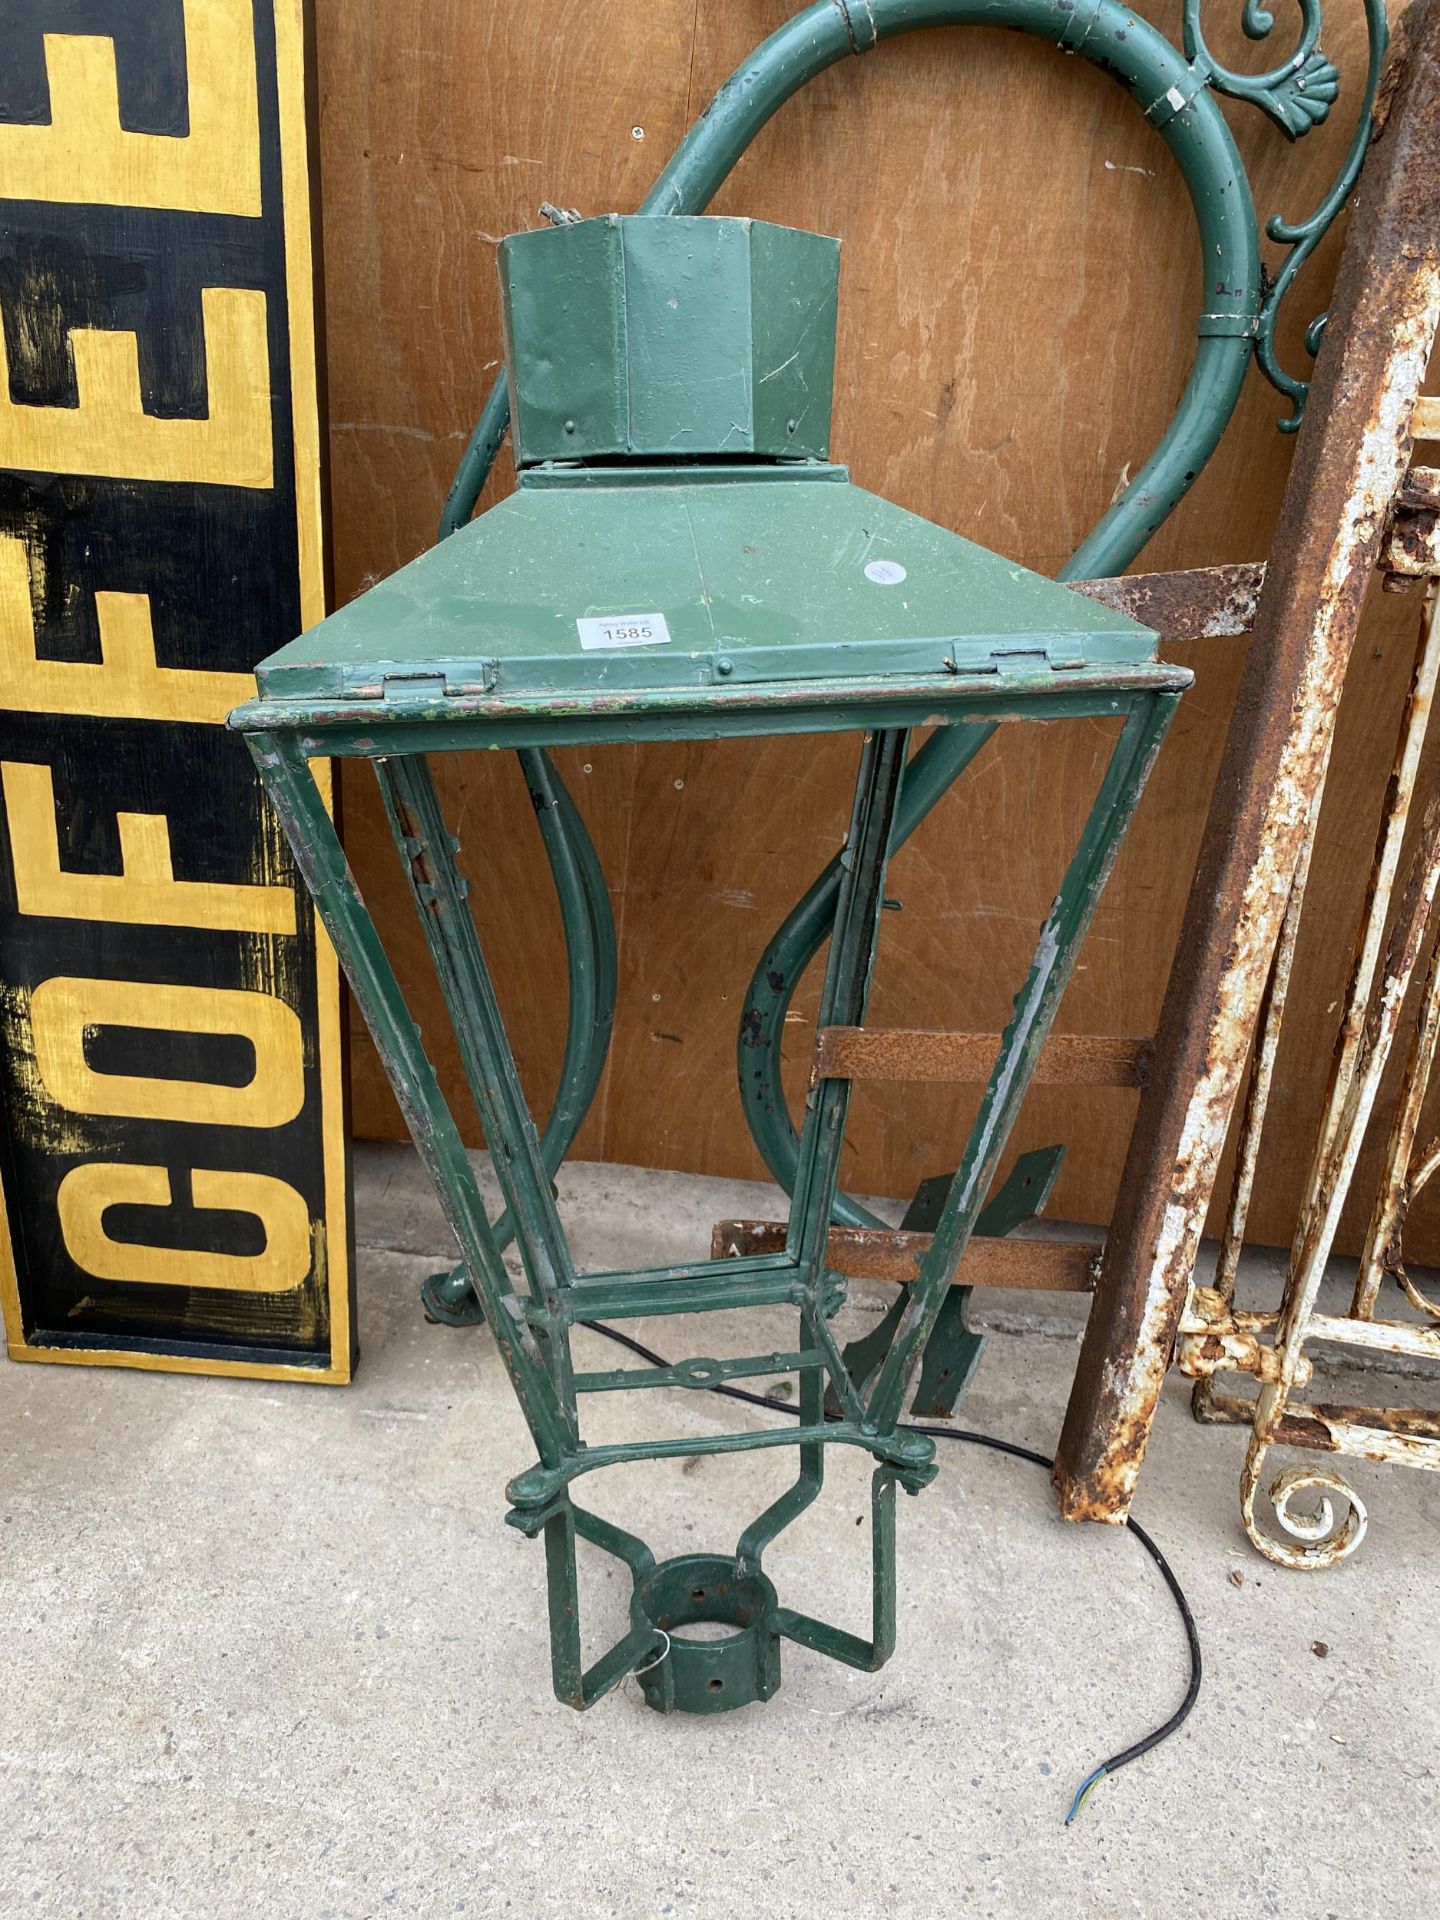 A VINTAGE DECORATIVE COURTYARD LIGHT WITH HANGING BRACKET (NO GLASS) - Image 2 of 4